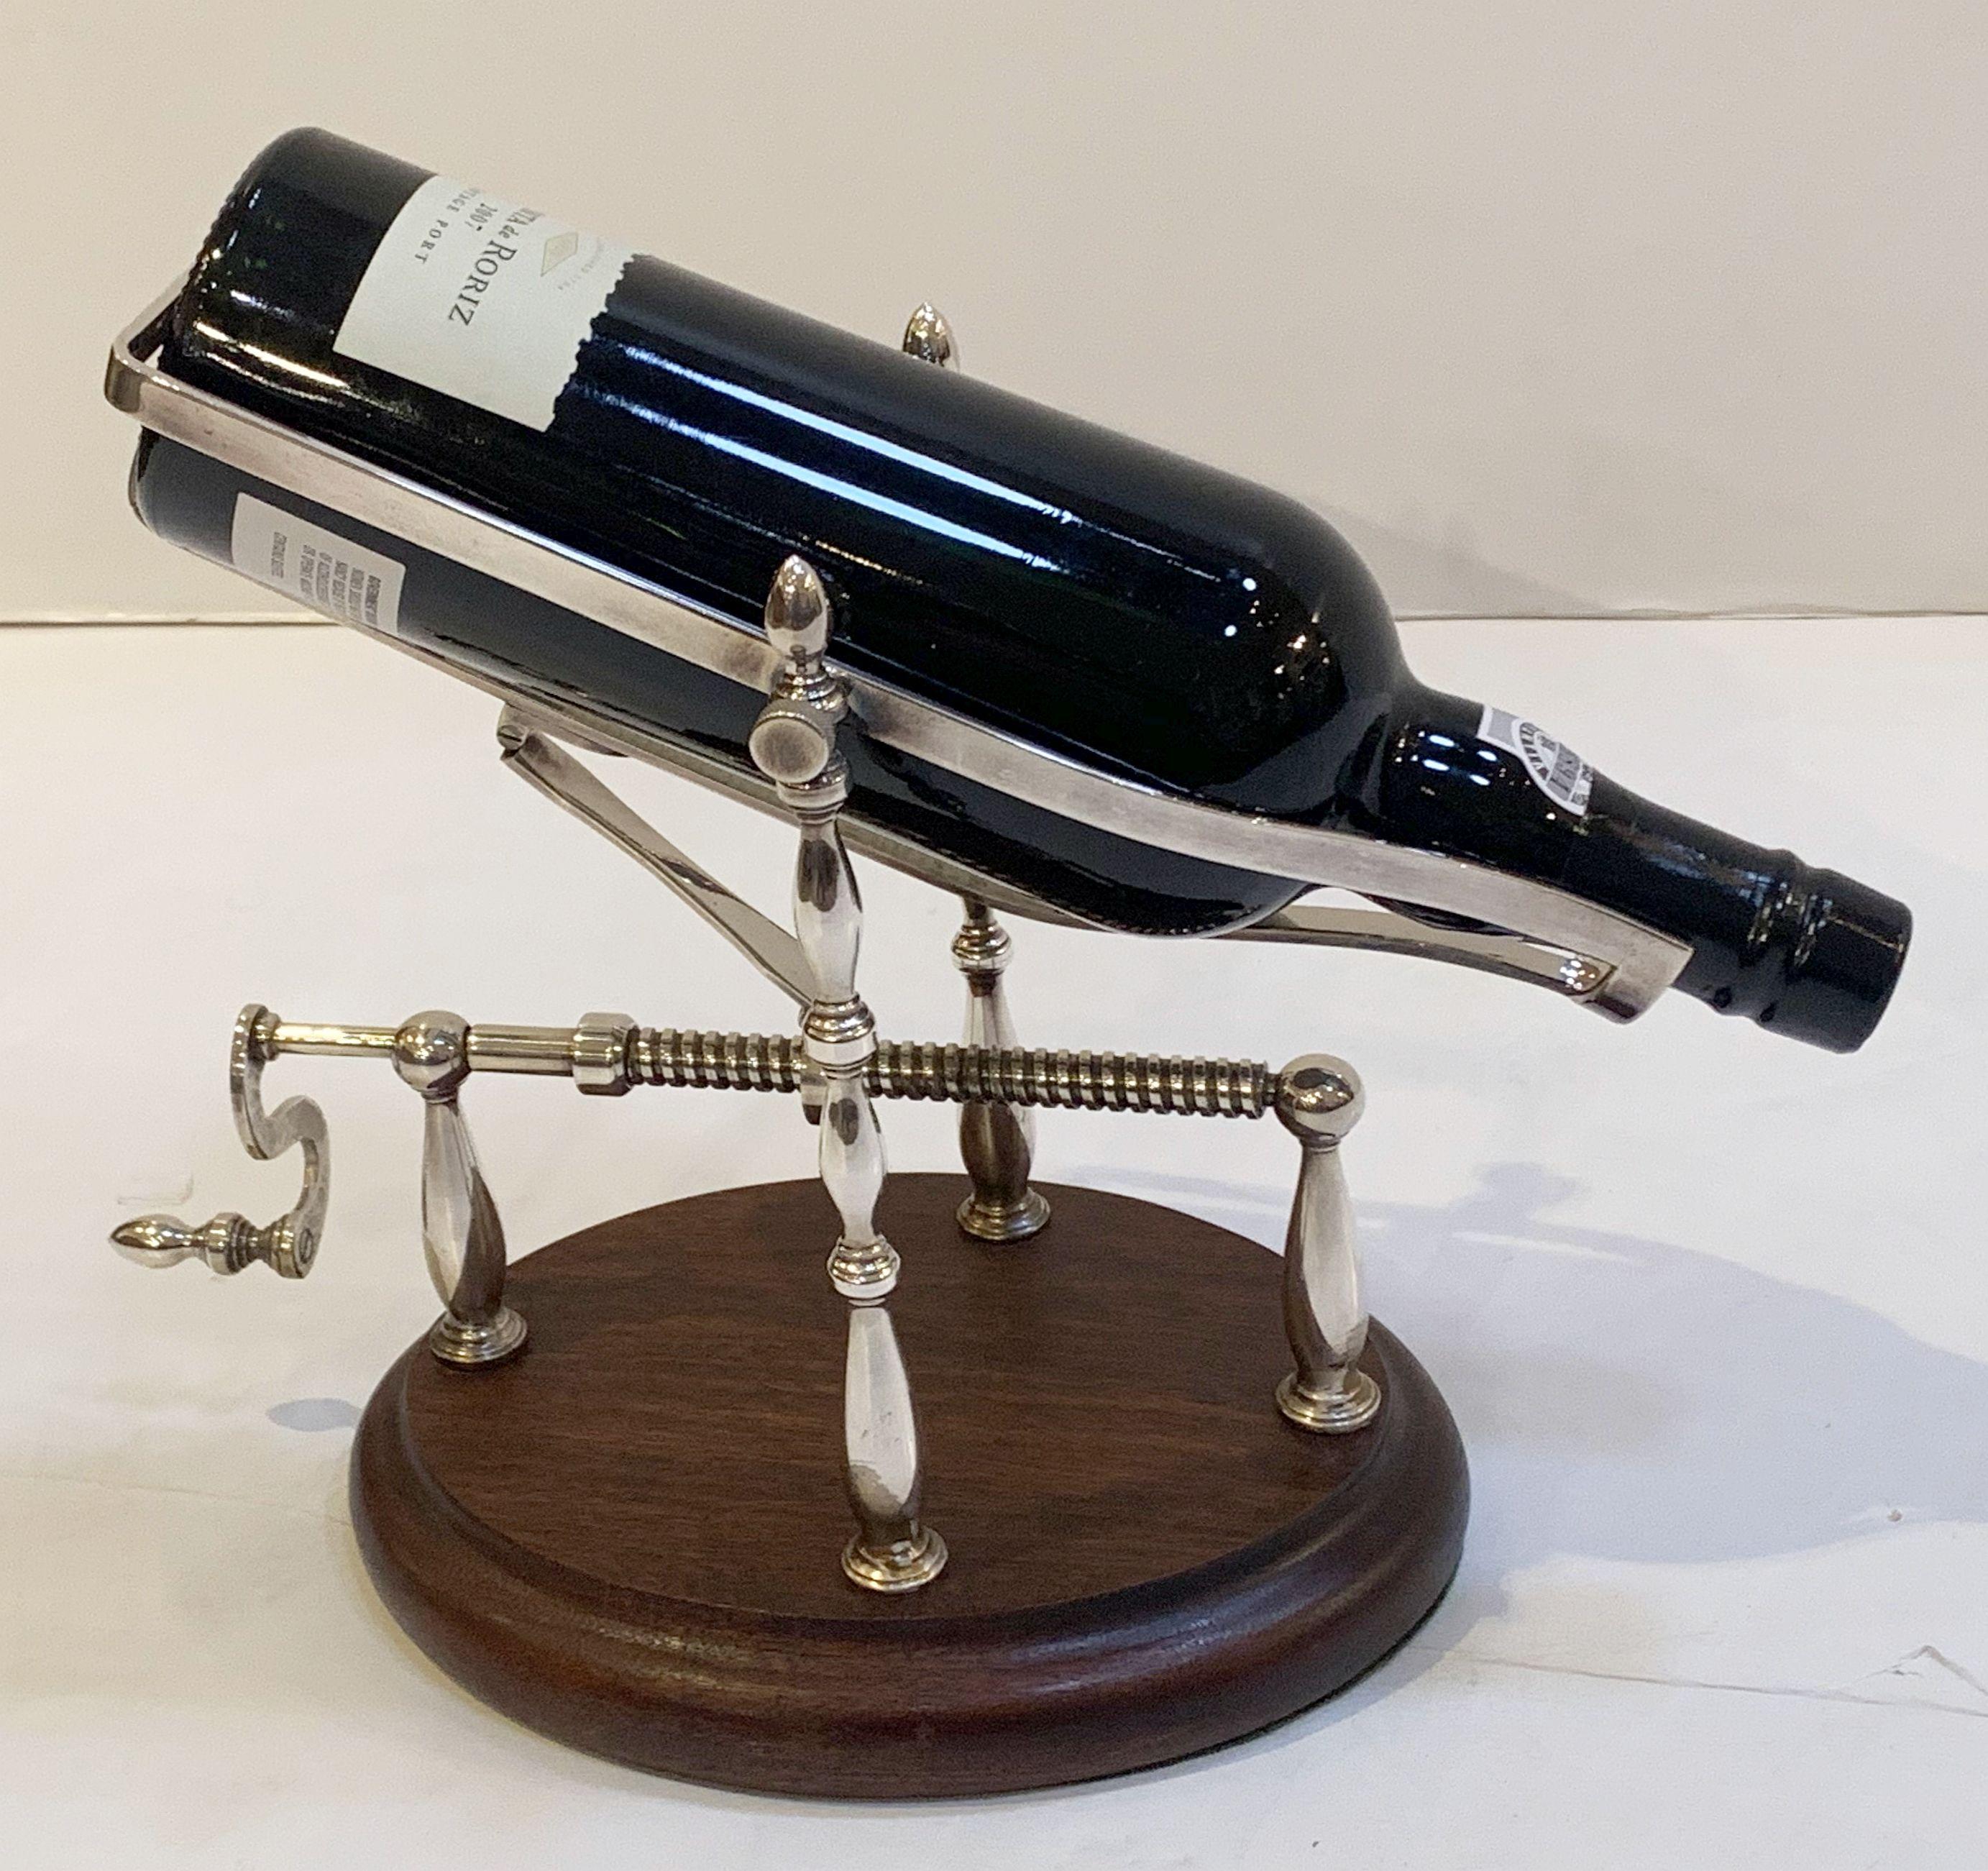 A handsome English port decanter or wine bottle pourer of silvered brass with turn screw action, on moulded ovoid wooden base.

A mechanical spirits pourer or decanting cradle is an artisan-like decanting device - turning the screw actuates the